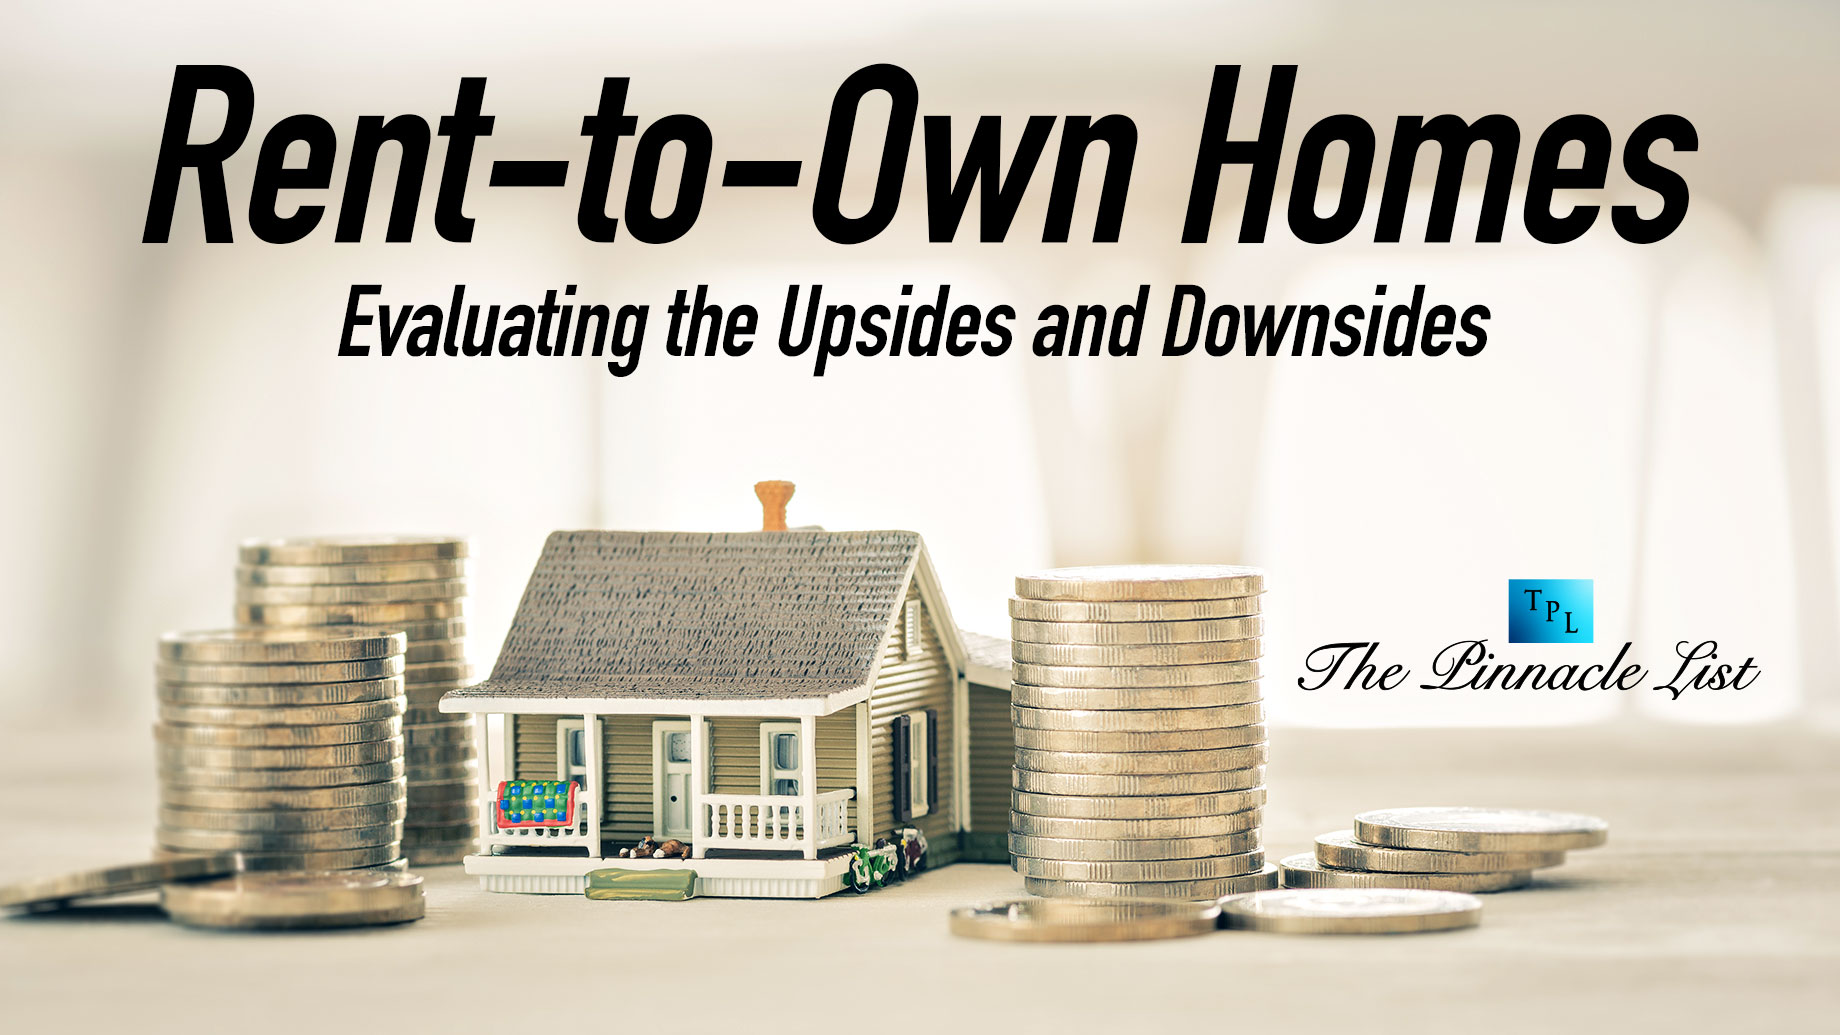 Rent-to-Own Homes: Evaluating the Upsides and Downsides